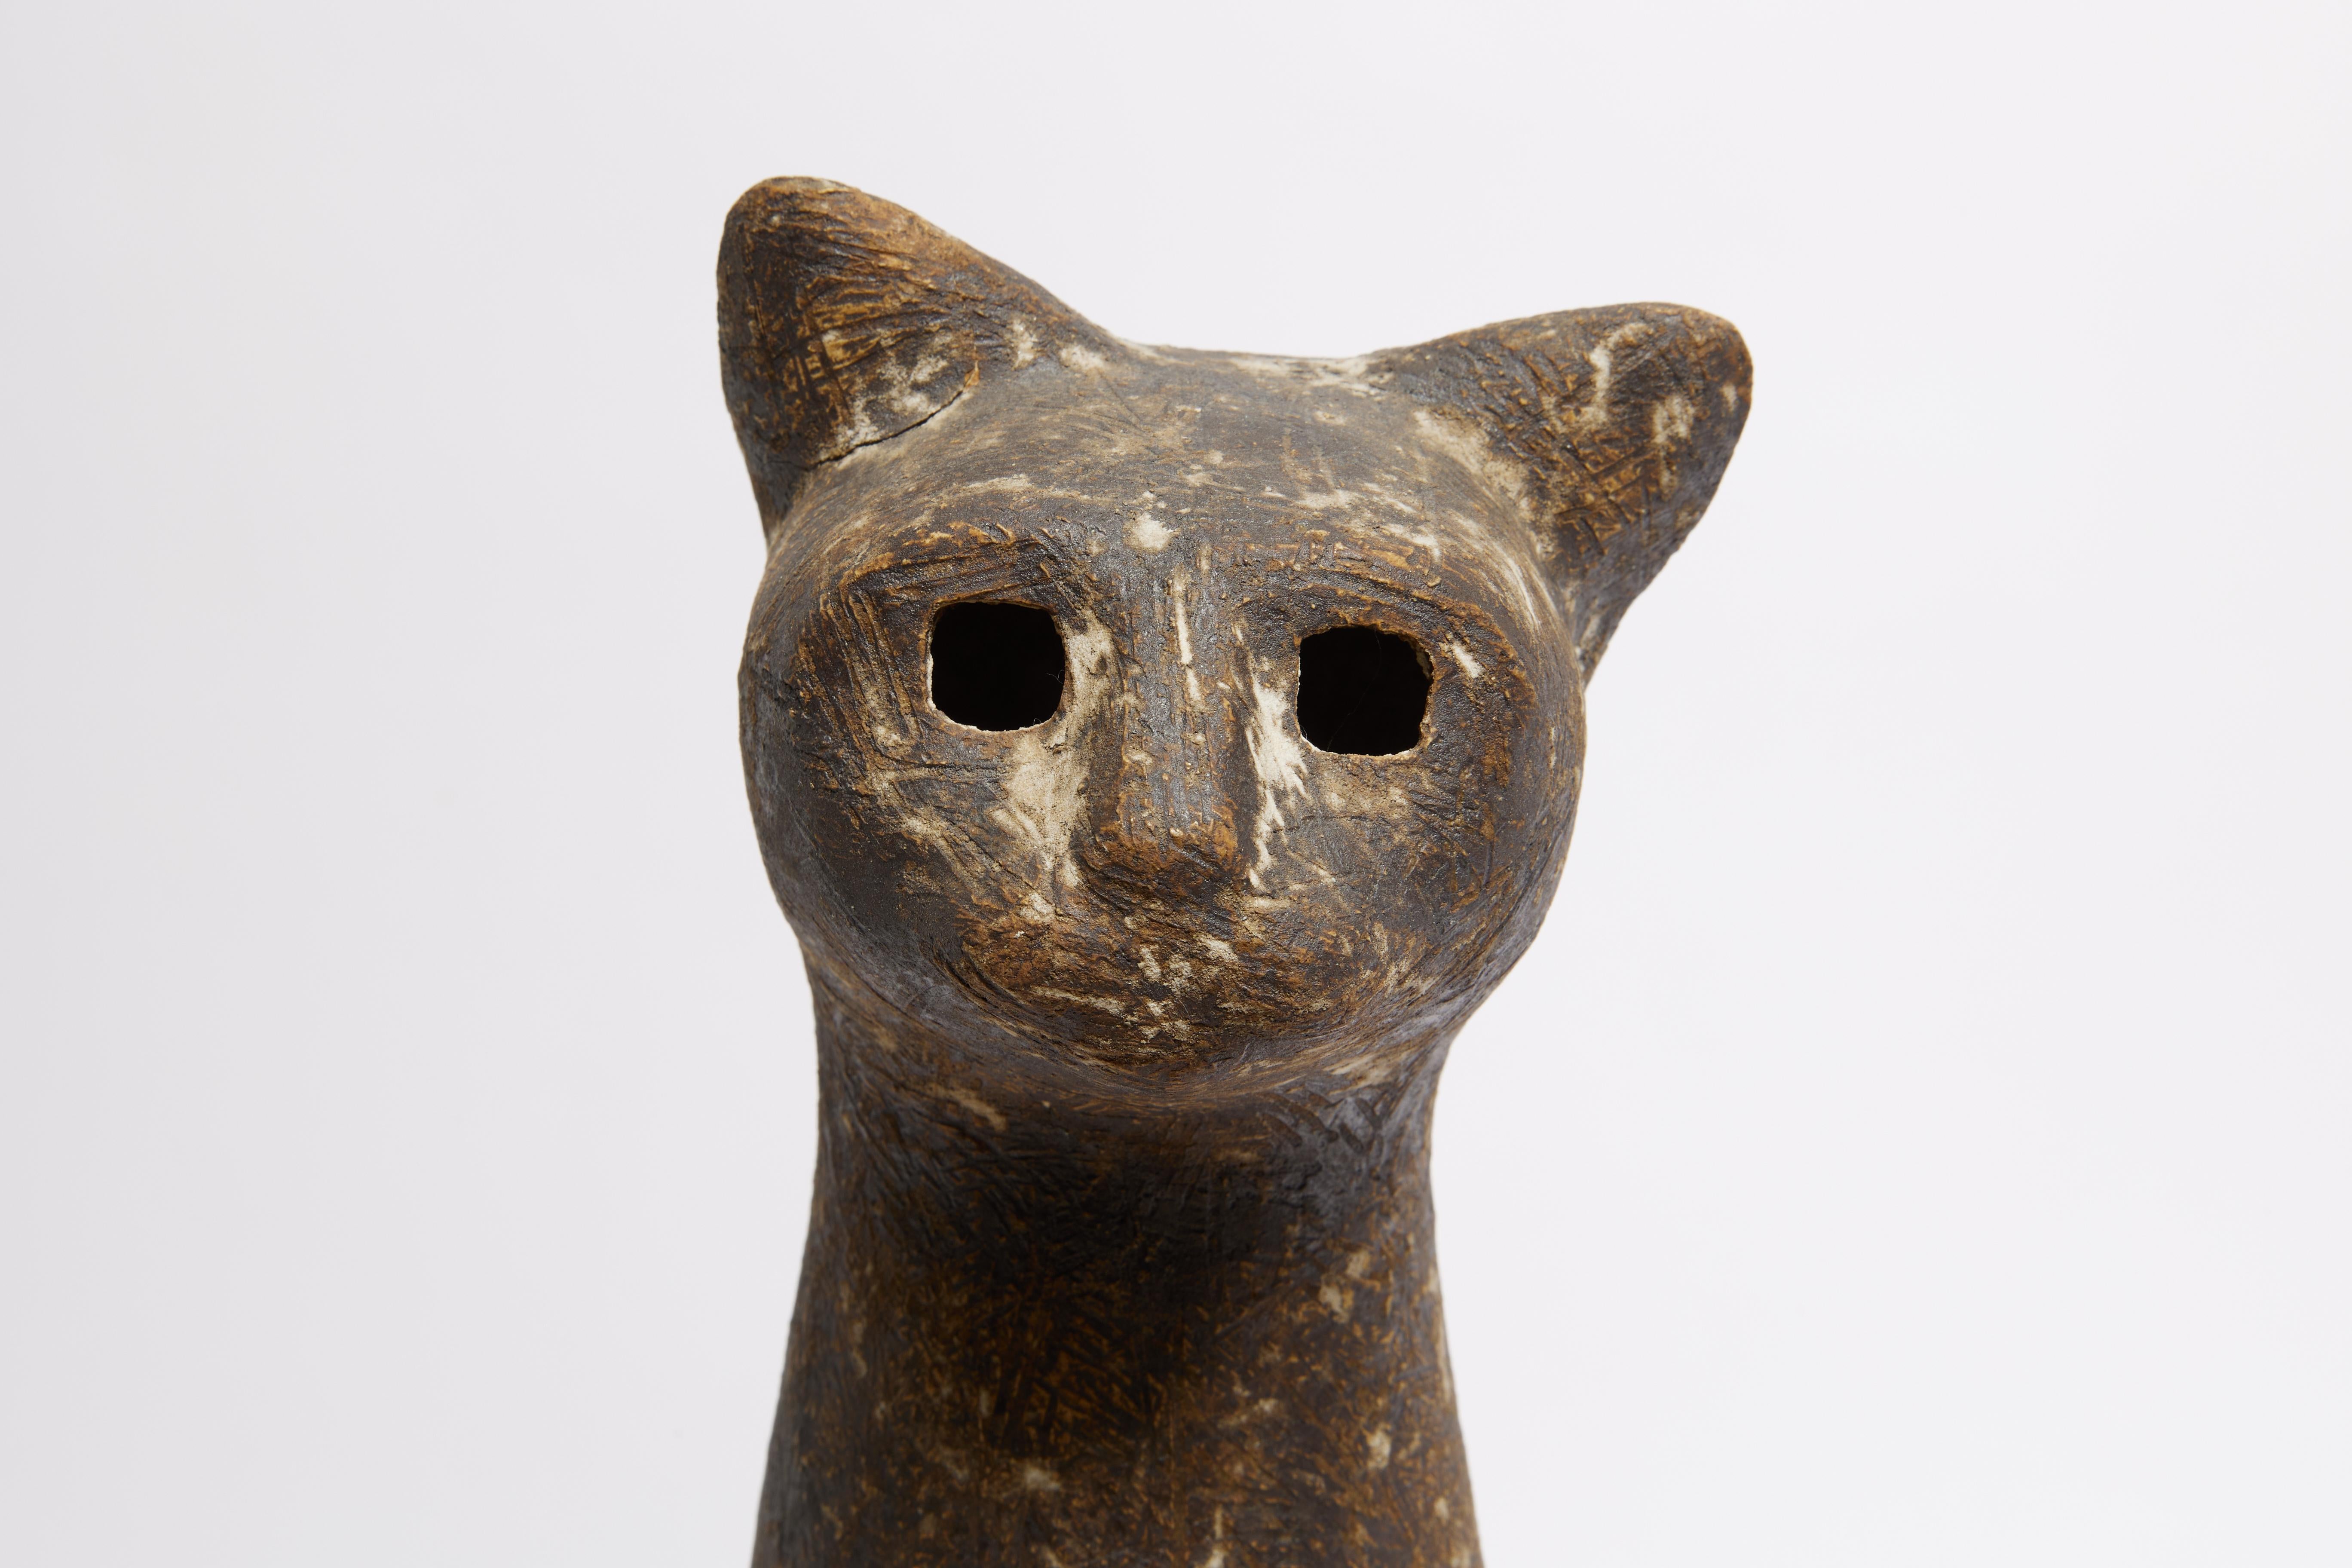 Mid-Century Seated Egyptian Cat, Glazed Stoneware, Cleveland School Artist - Sculpture by  Claude Conover